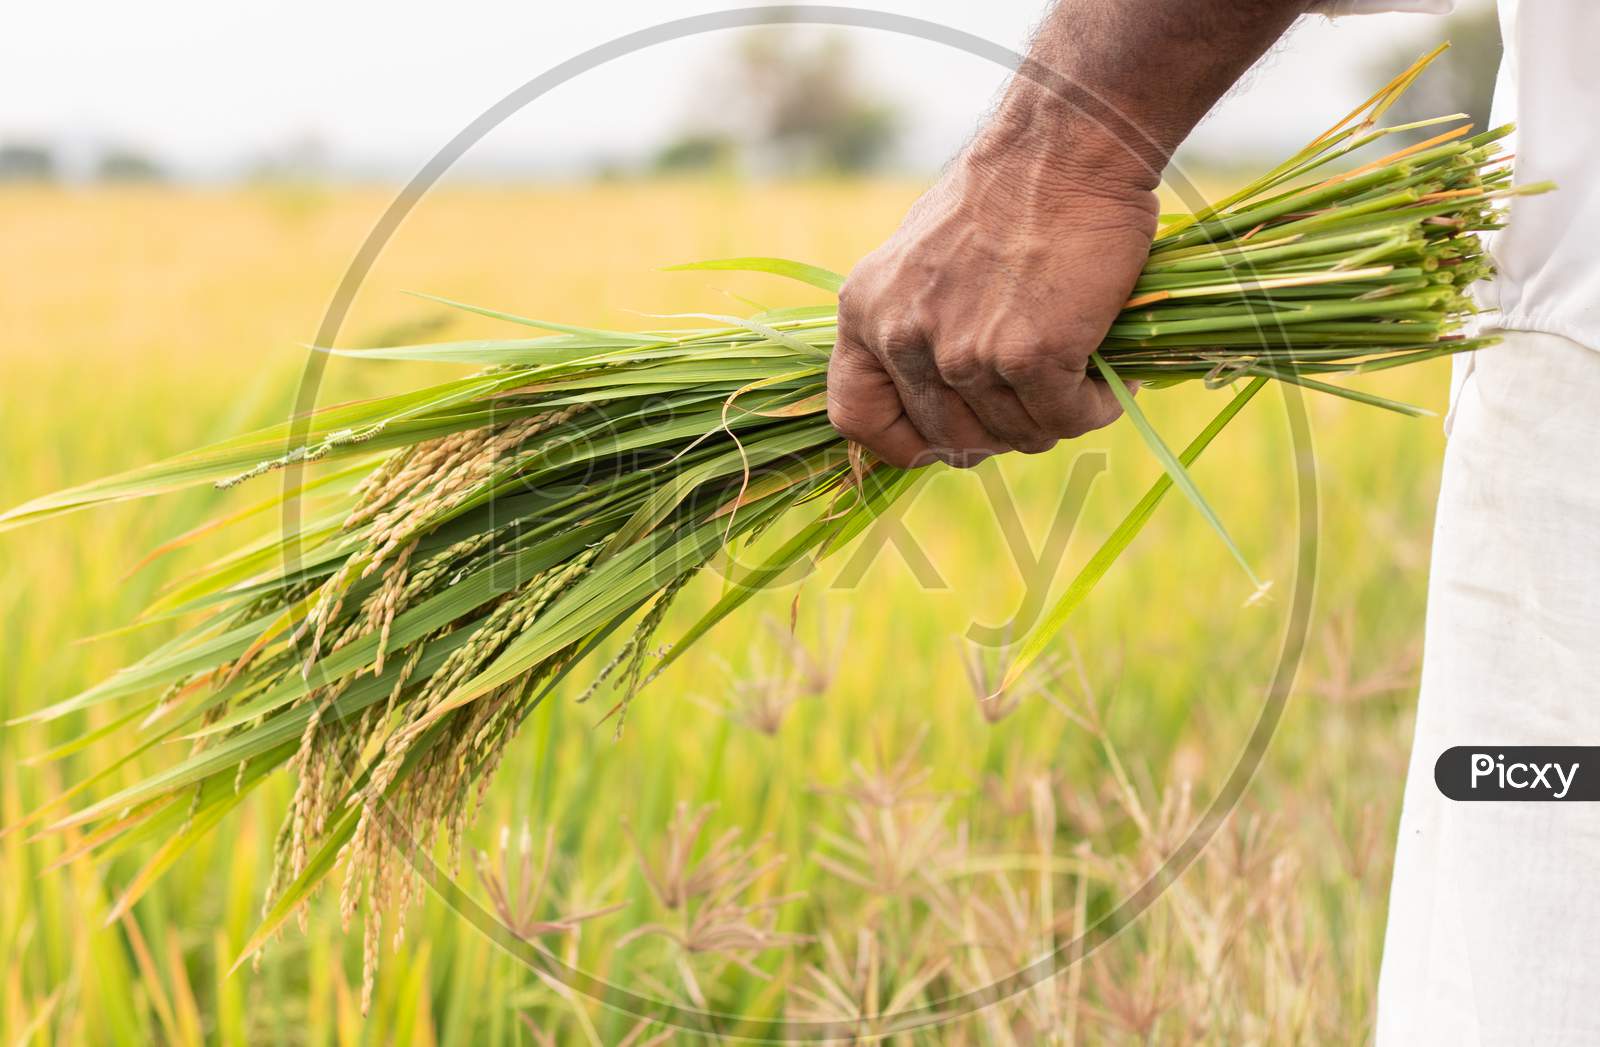 A Farmer Holding Handful of Paddy Plants or Rice Plants in Agriculture Field